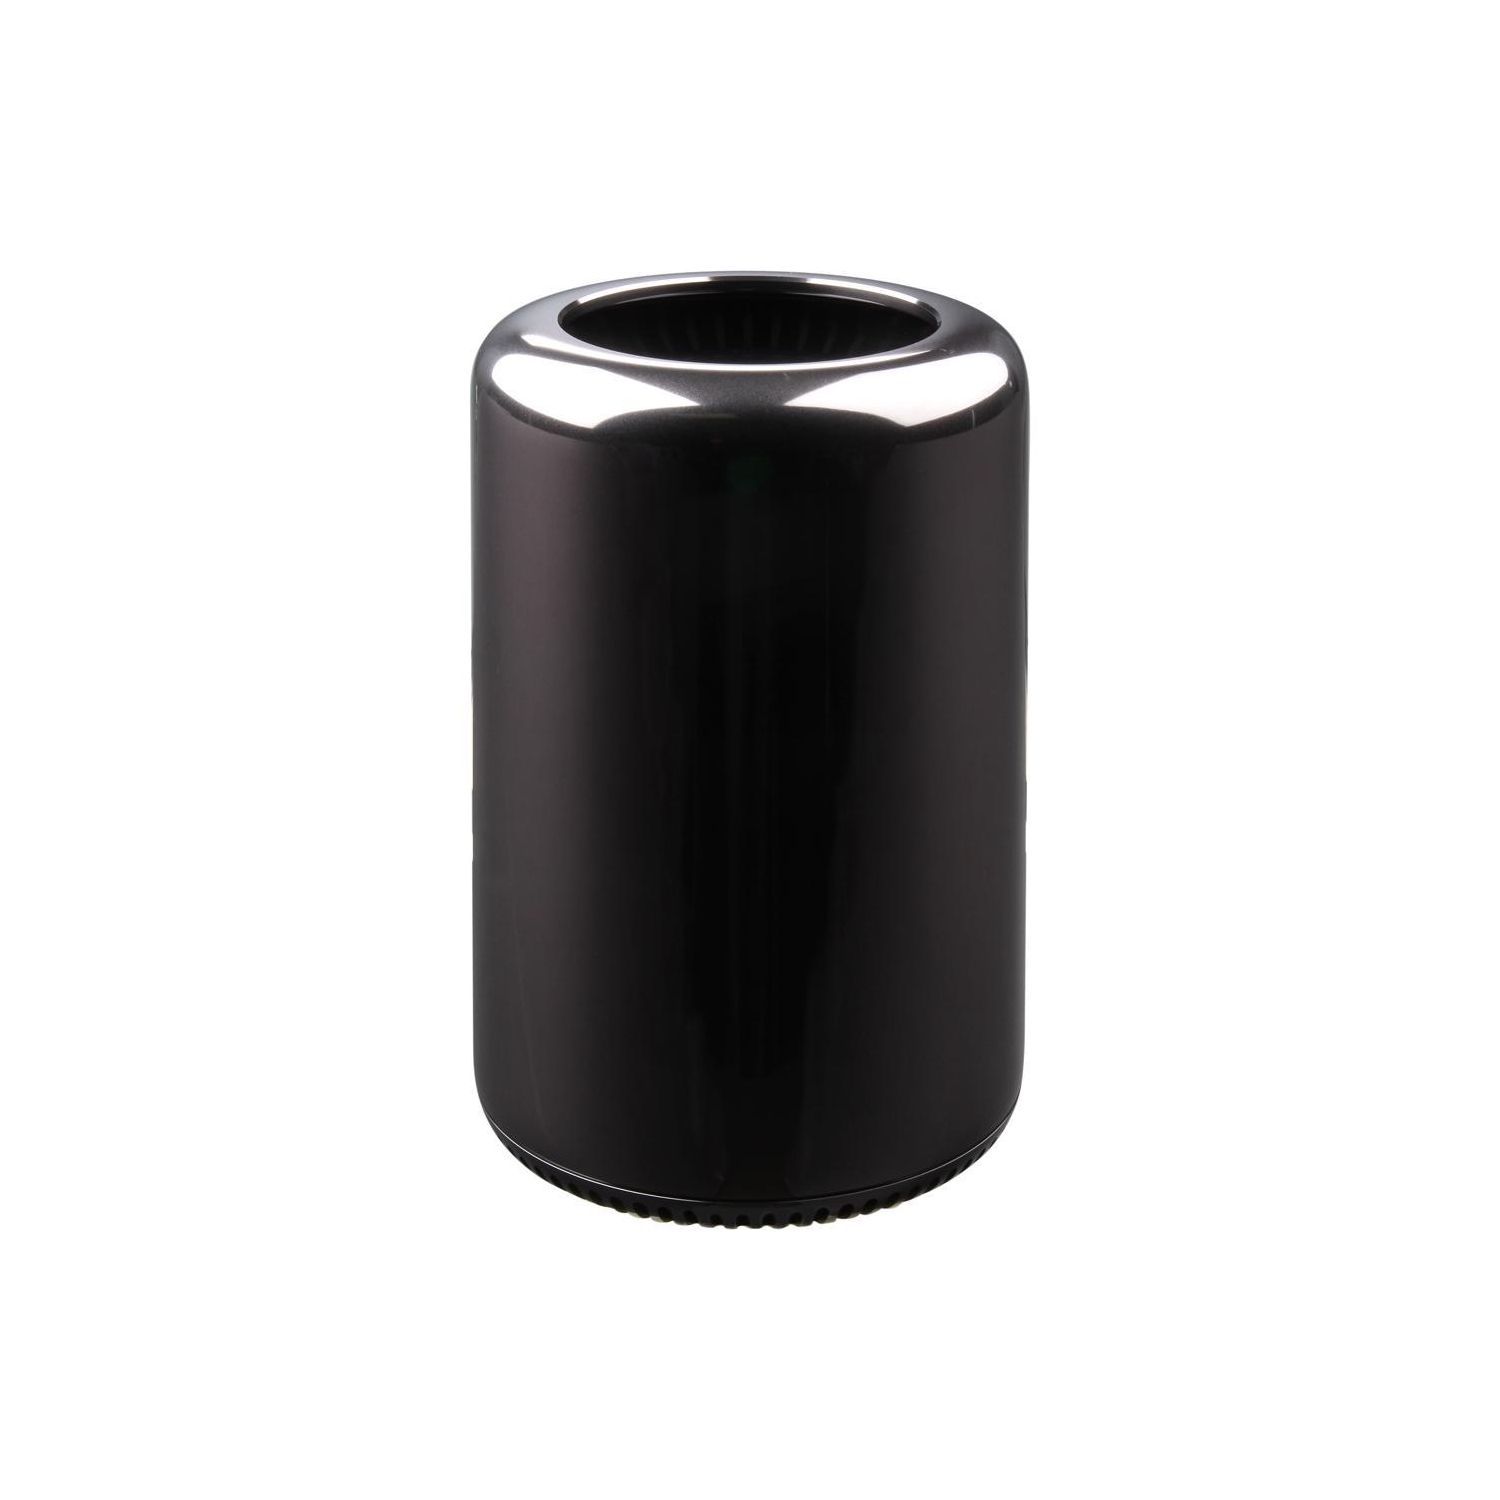 Refurbished (Excellent) - Apple Mac Pro Late 2013 CTO/MD878LL/A Desktop Computer 3.0Ghz 8-Core 16GB 256GB SSD Refurbished Grade A+ 10/10 Condition